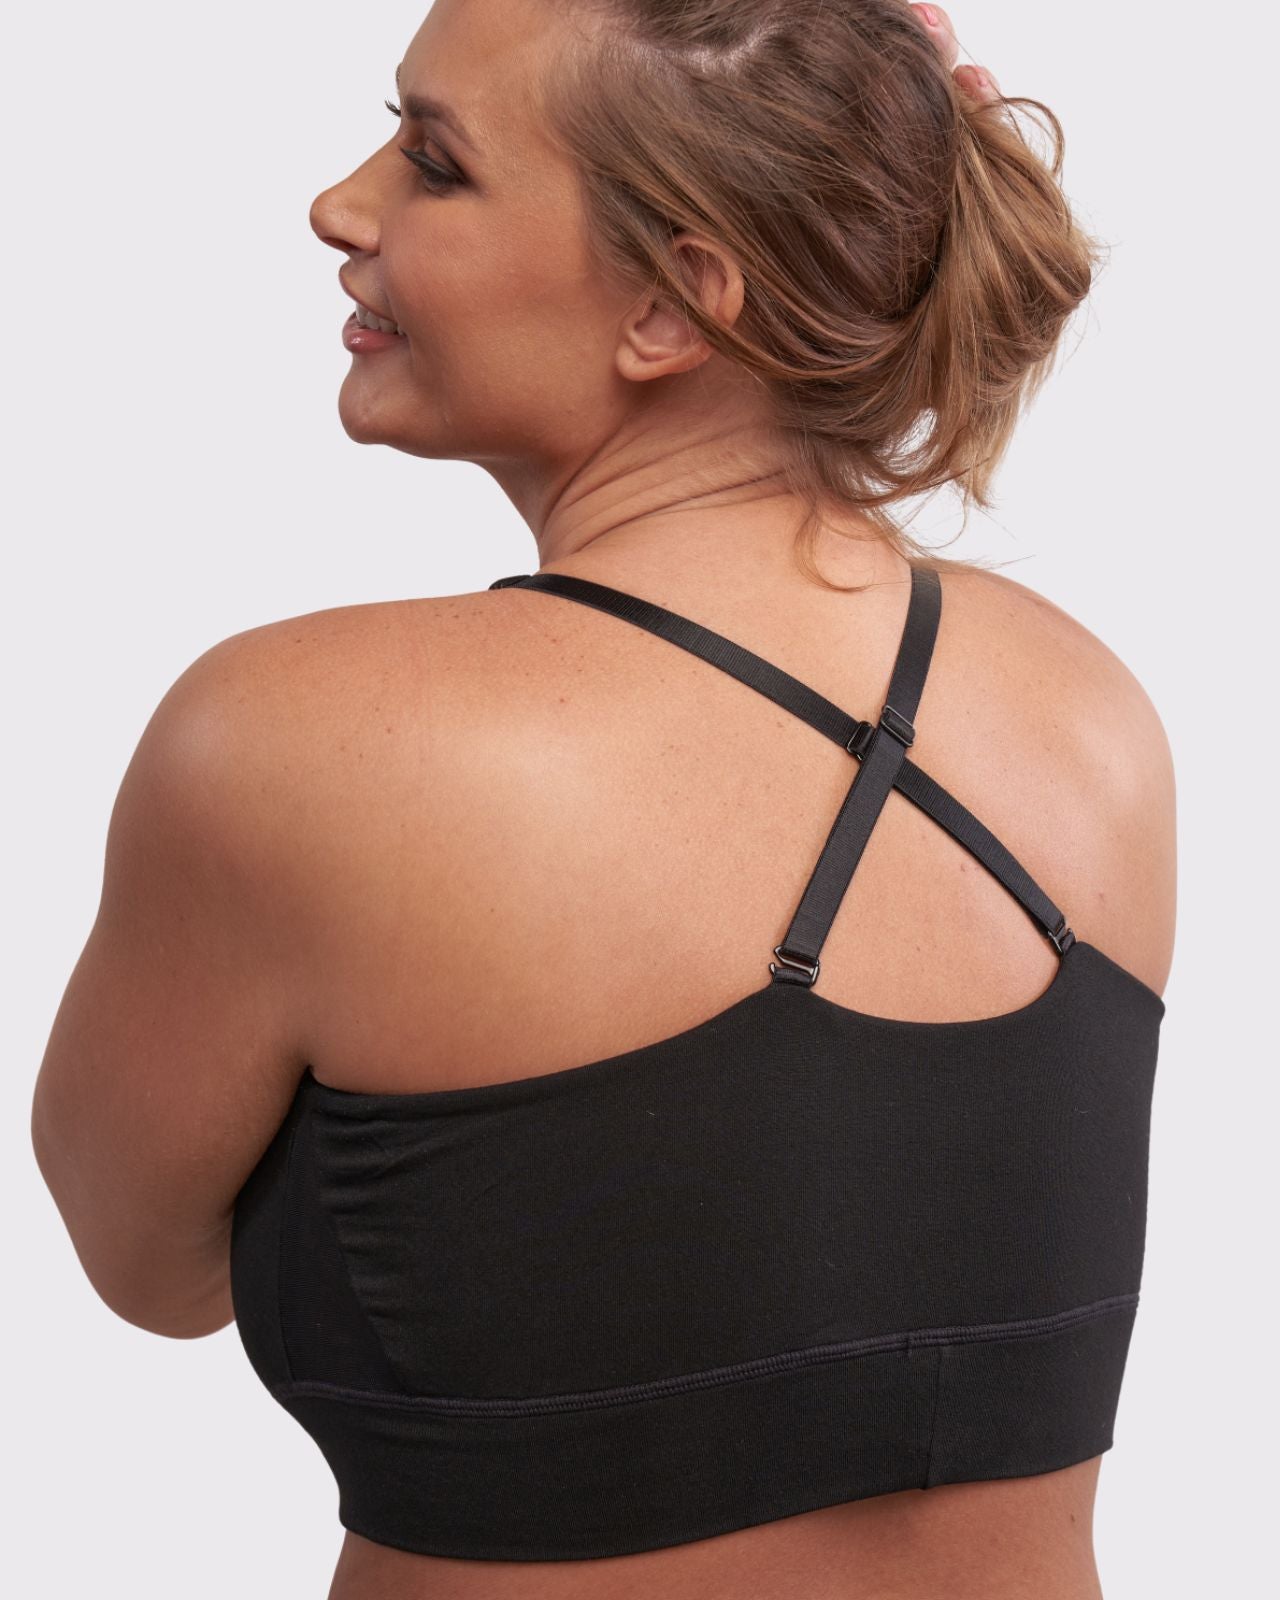 TOP TIER SPORTS BRAS FOR BACK DAY, Gallery posted by Lesliee